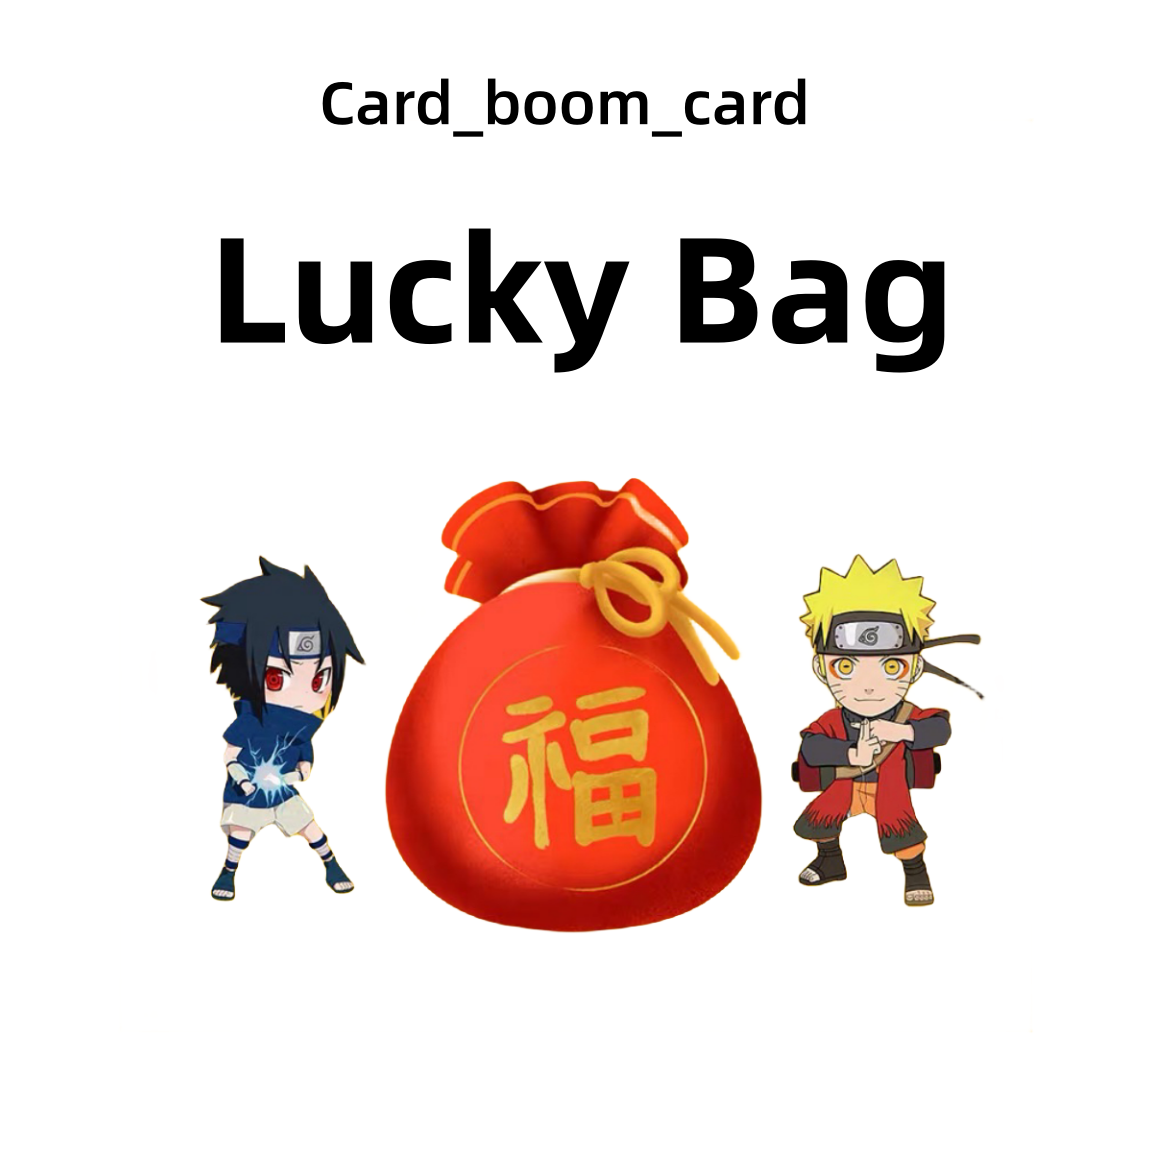 13.Naruto Lucky Bag（Get at least 2 hit cards）